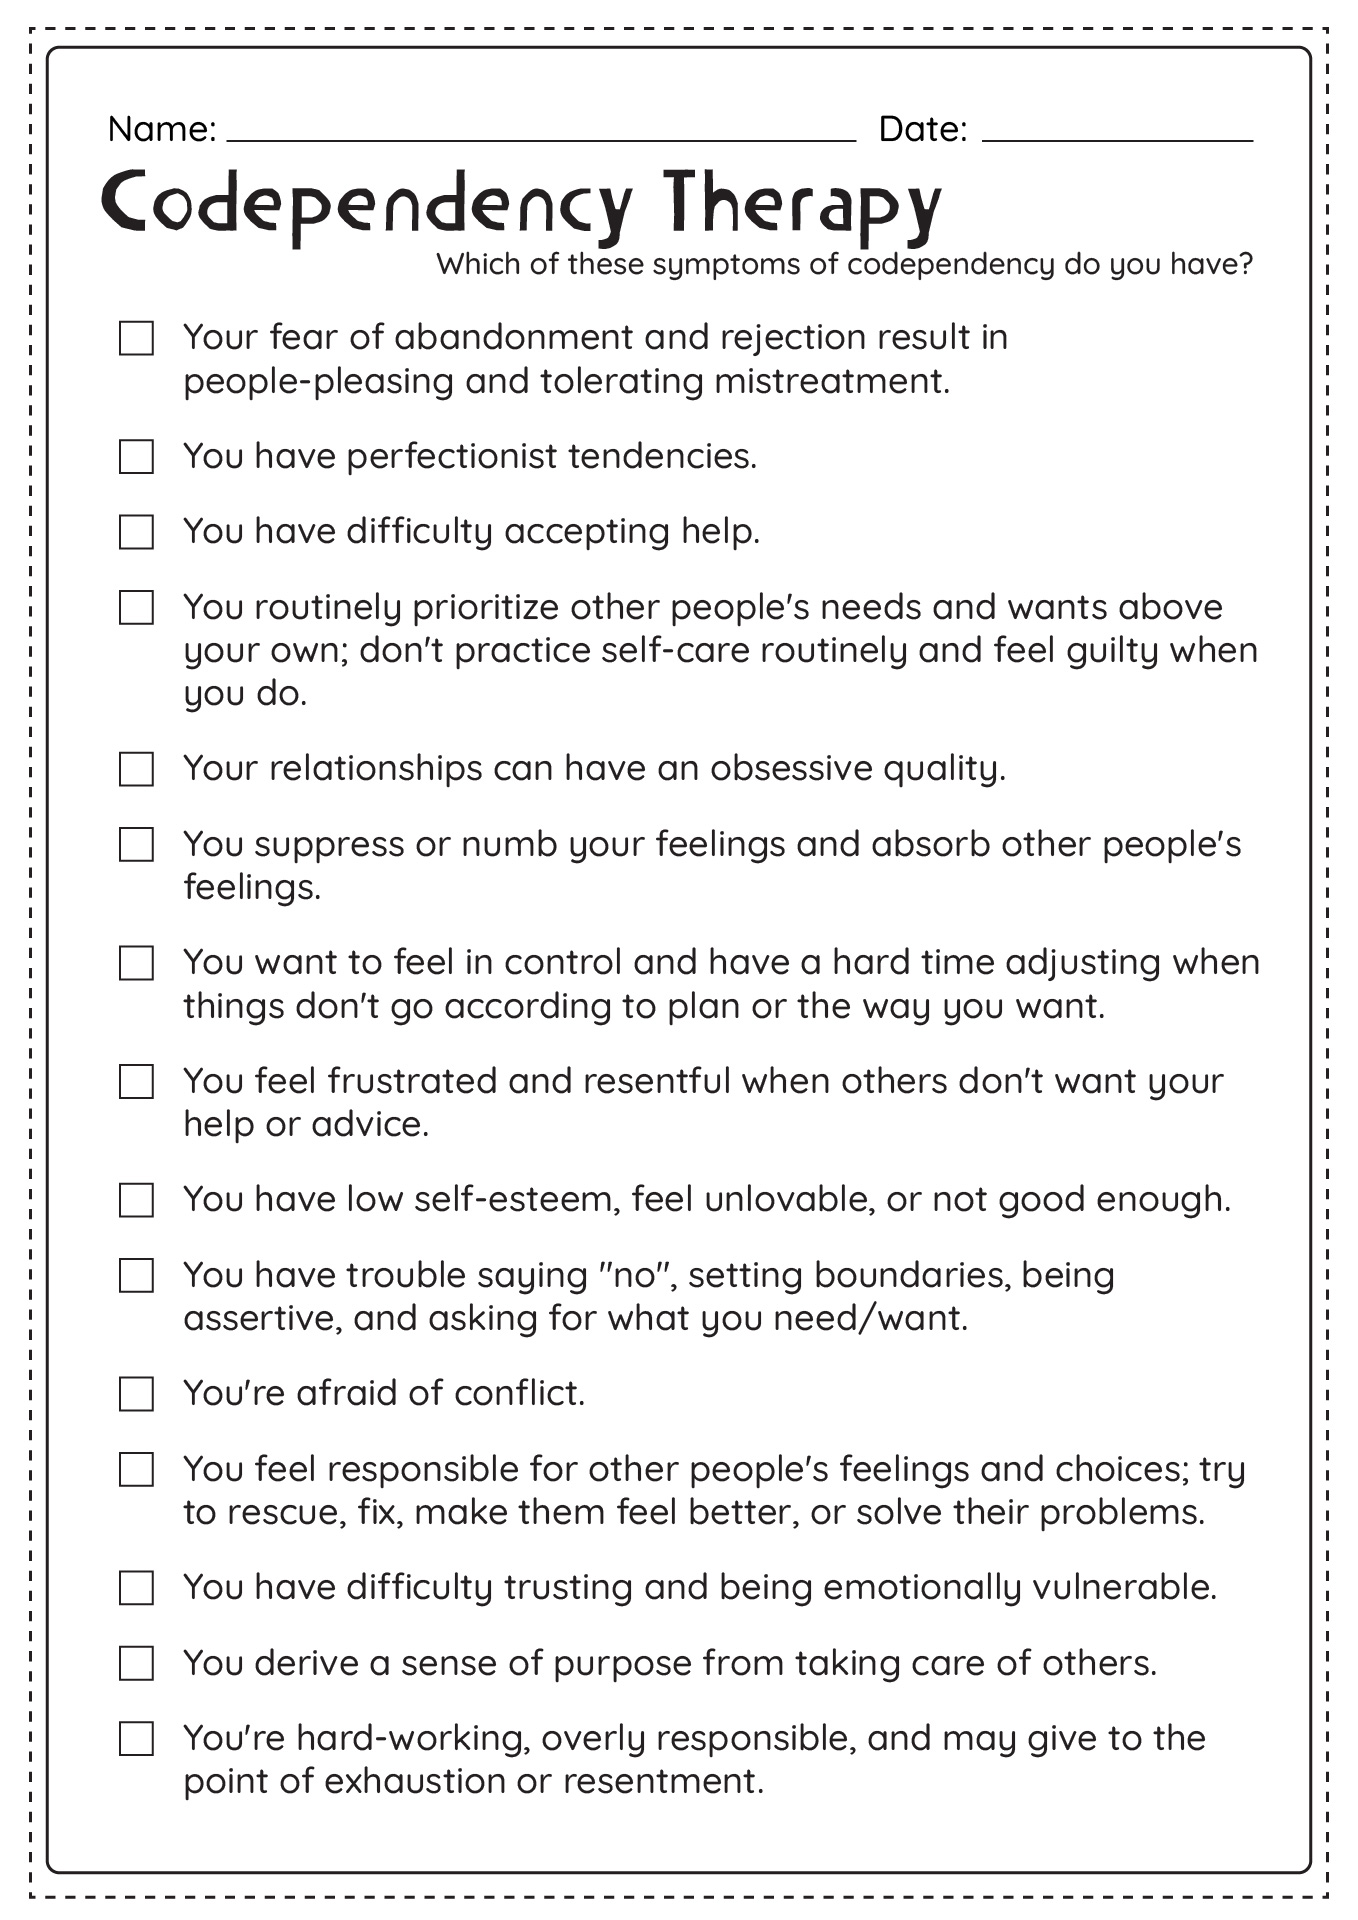 Codependency Therapy Worksheets